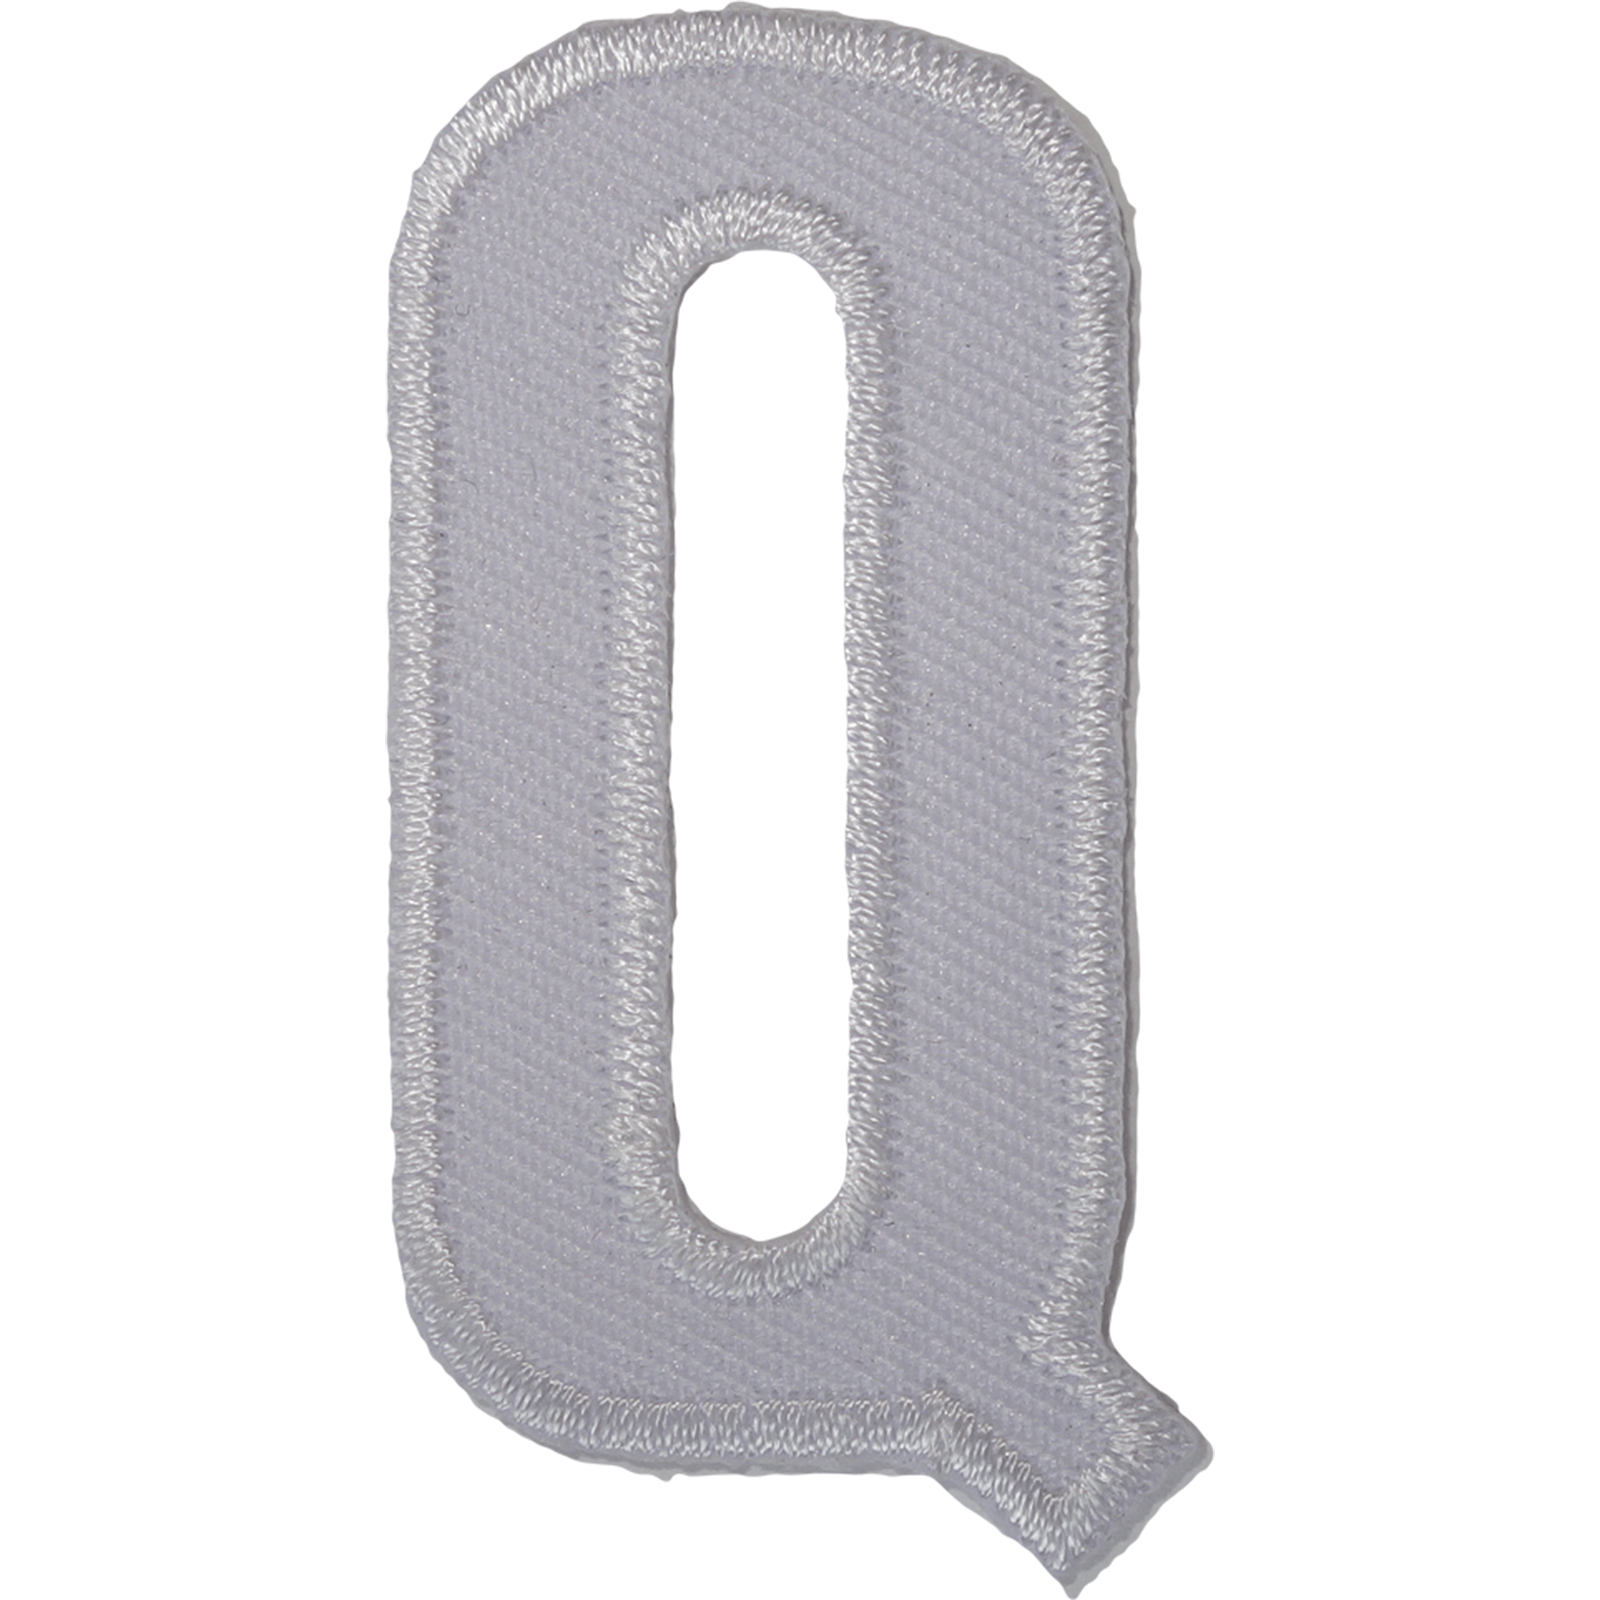 White Letter Number Iron Sew On Patches Badges Name Letters Numbers Badge Patch